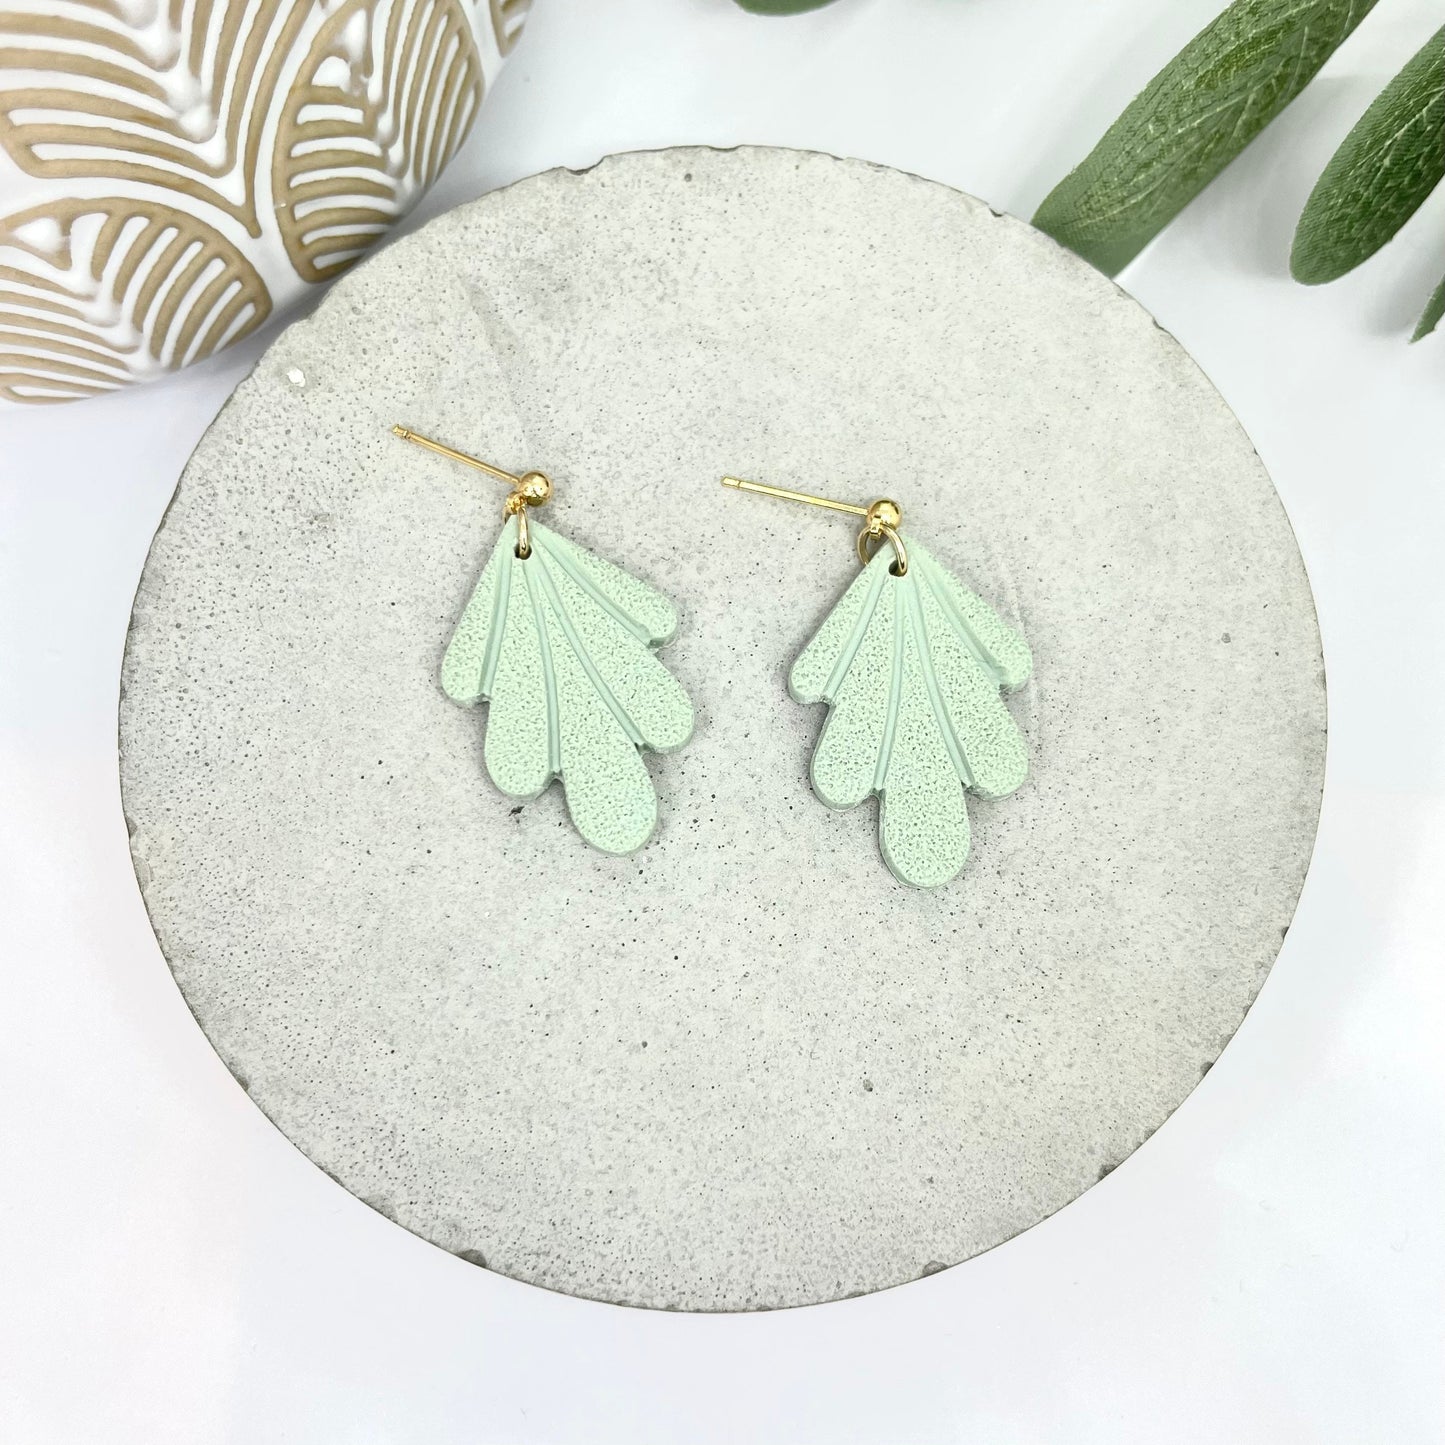 Textured green polymer clay earrings, post box gift, best friend gift, girlfriend gift, sister gift